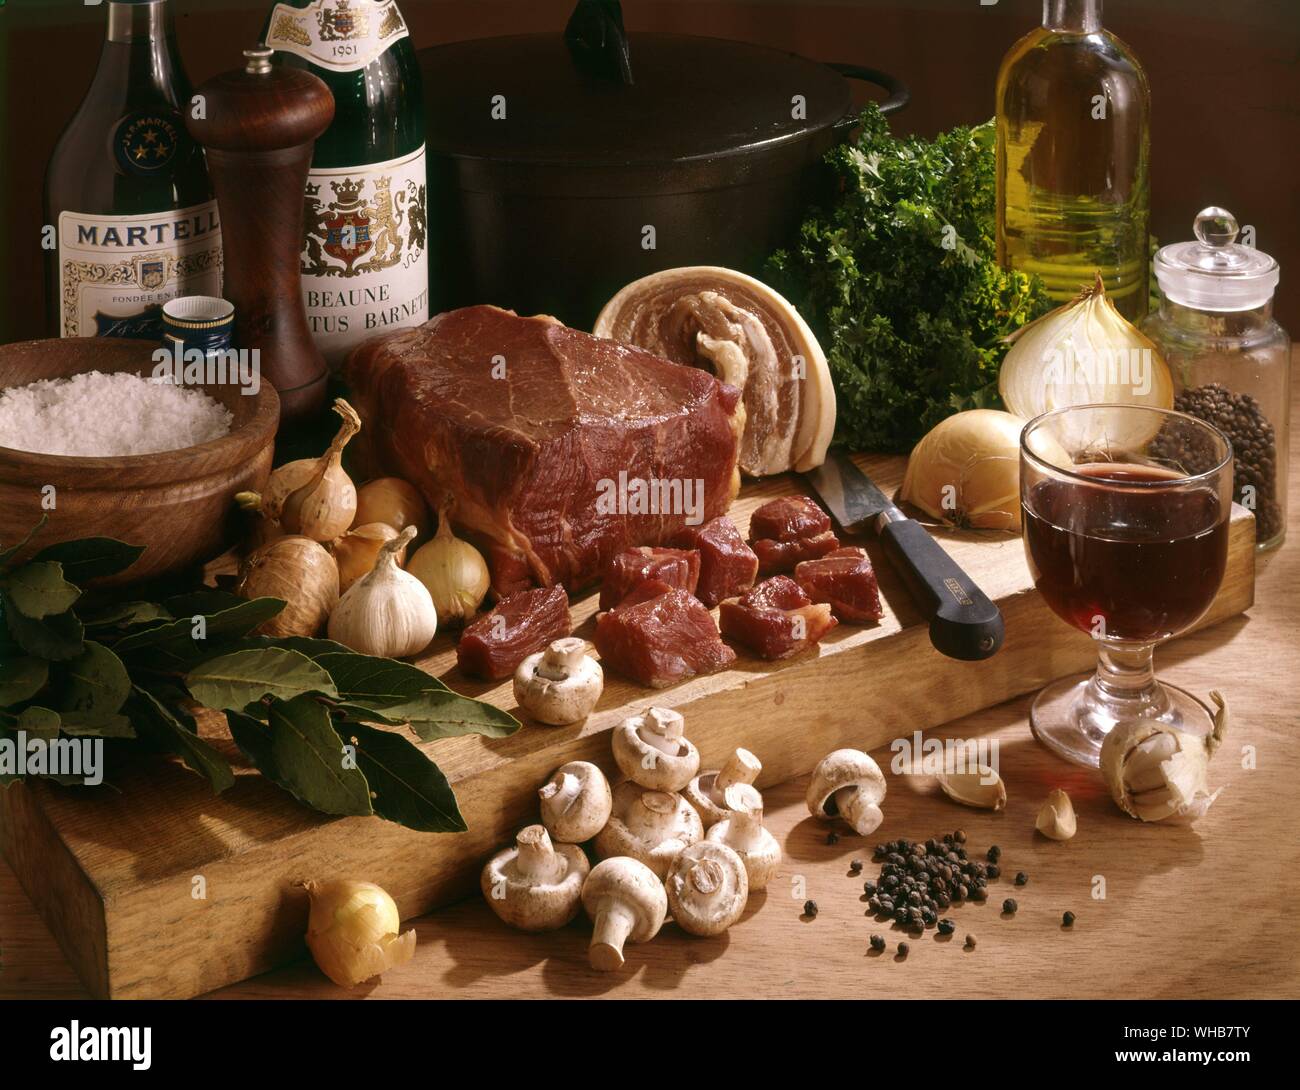 Meat mushrooms onions and garlic on a board. Stock Photo